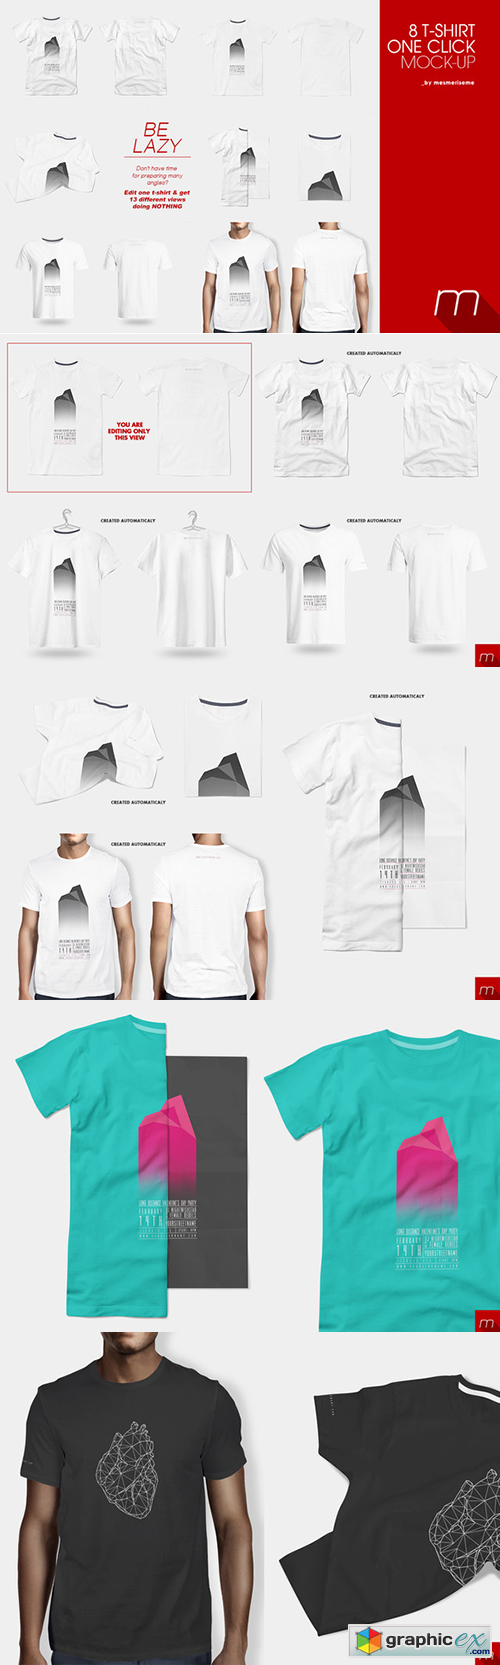 8 T-Shirt with One Click Mock-up